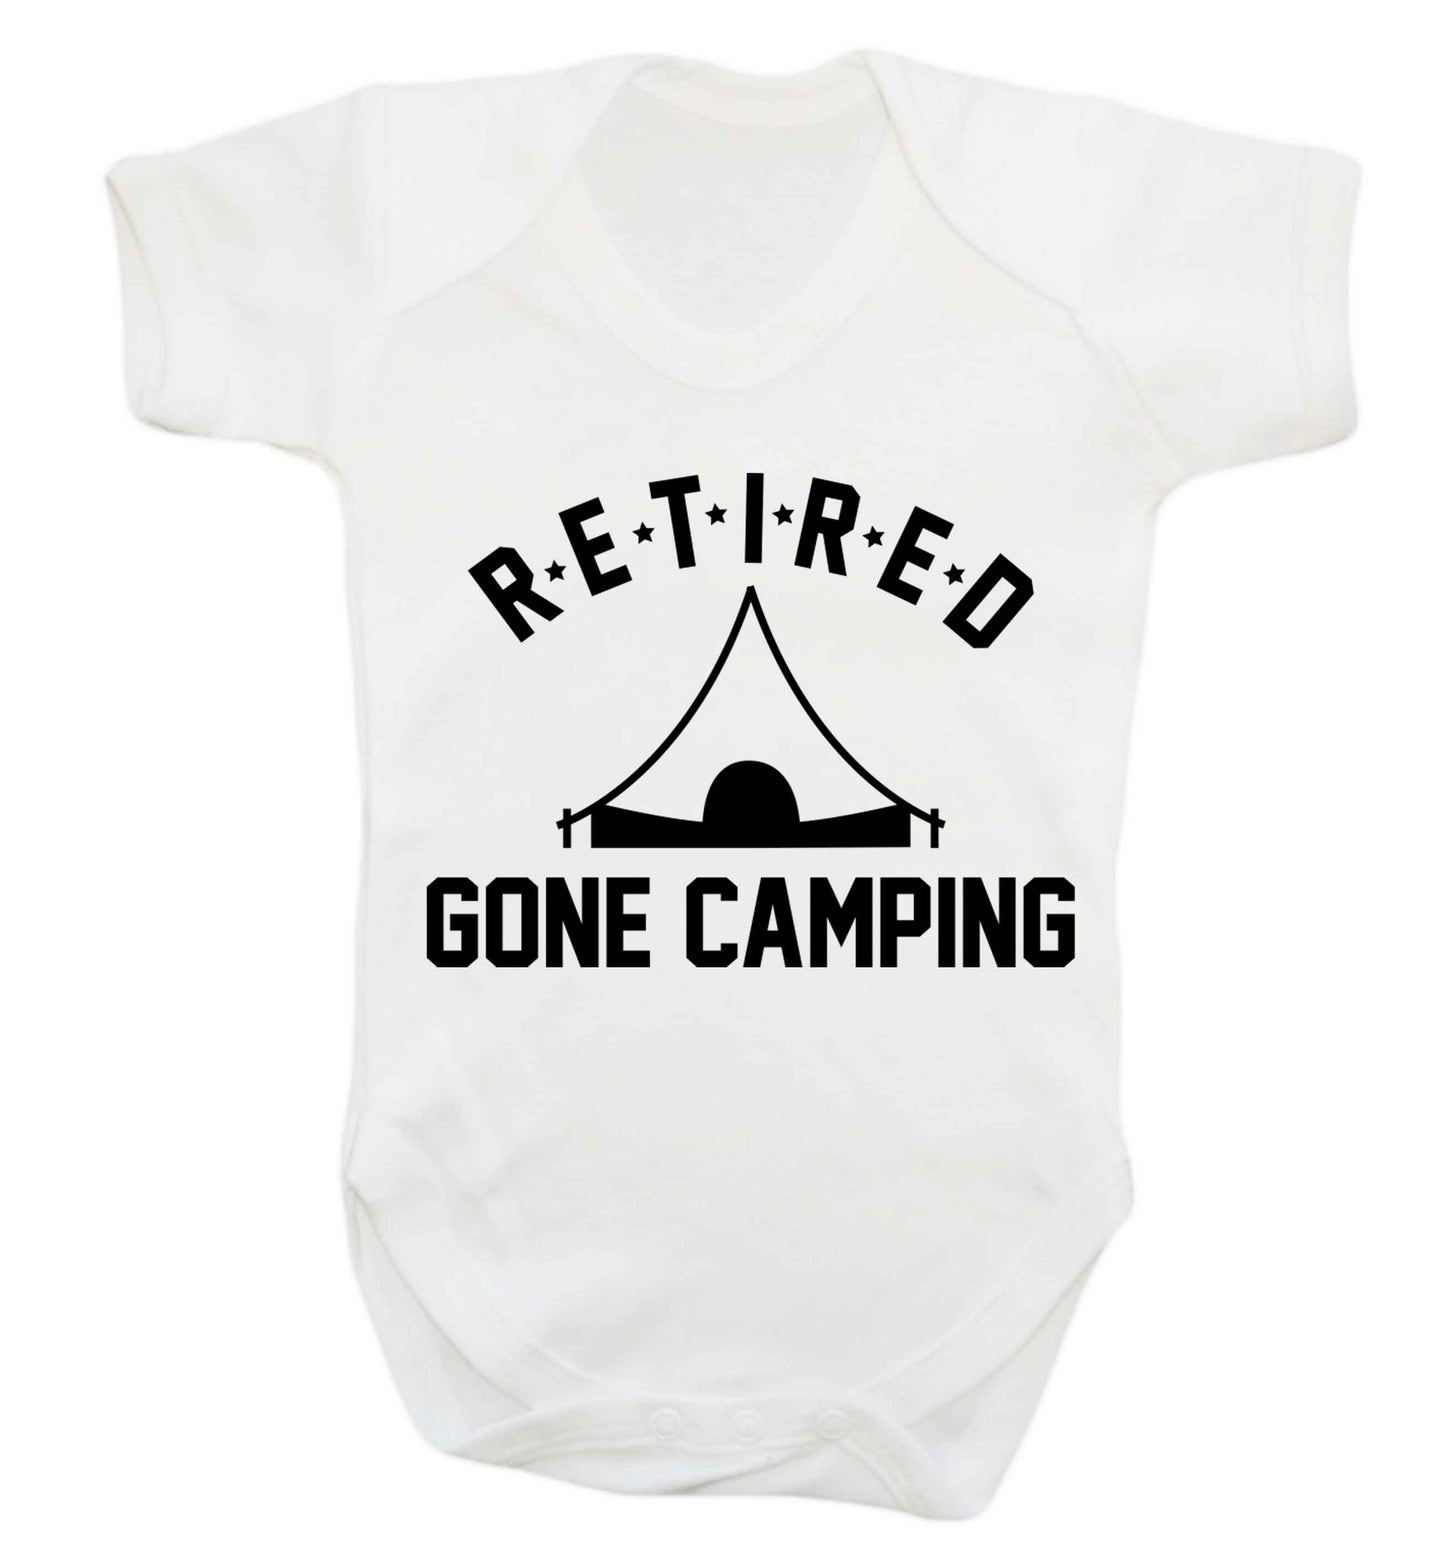 Retired gone camping Baby Vest white 18-24 months